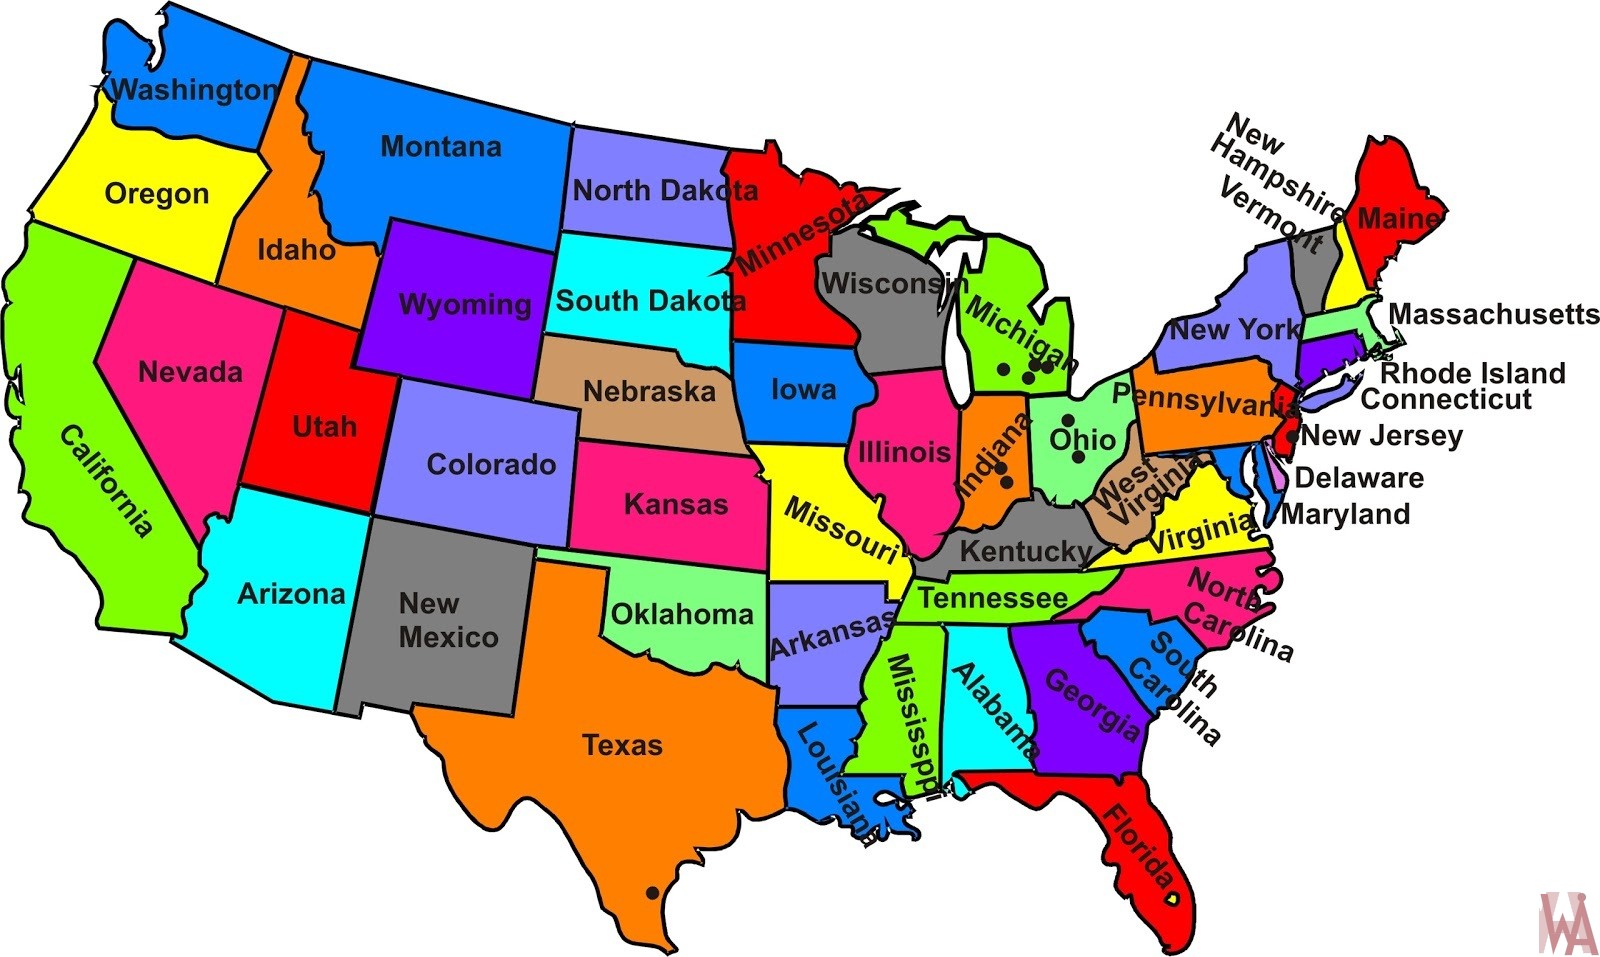 Colorful States Map of The USA